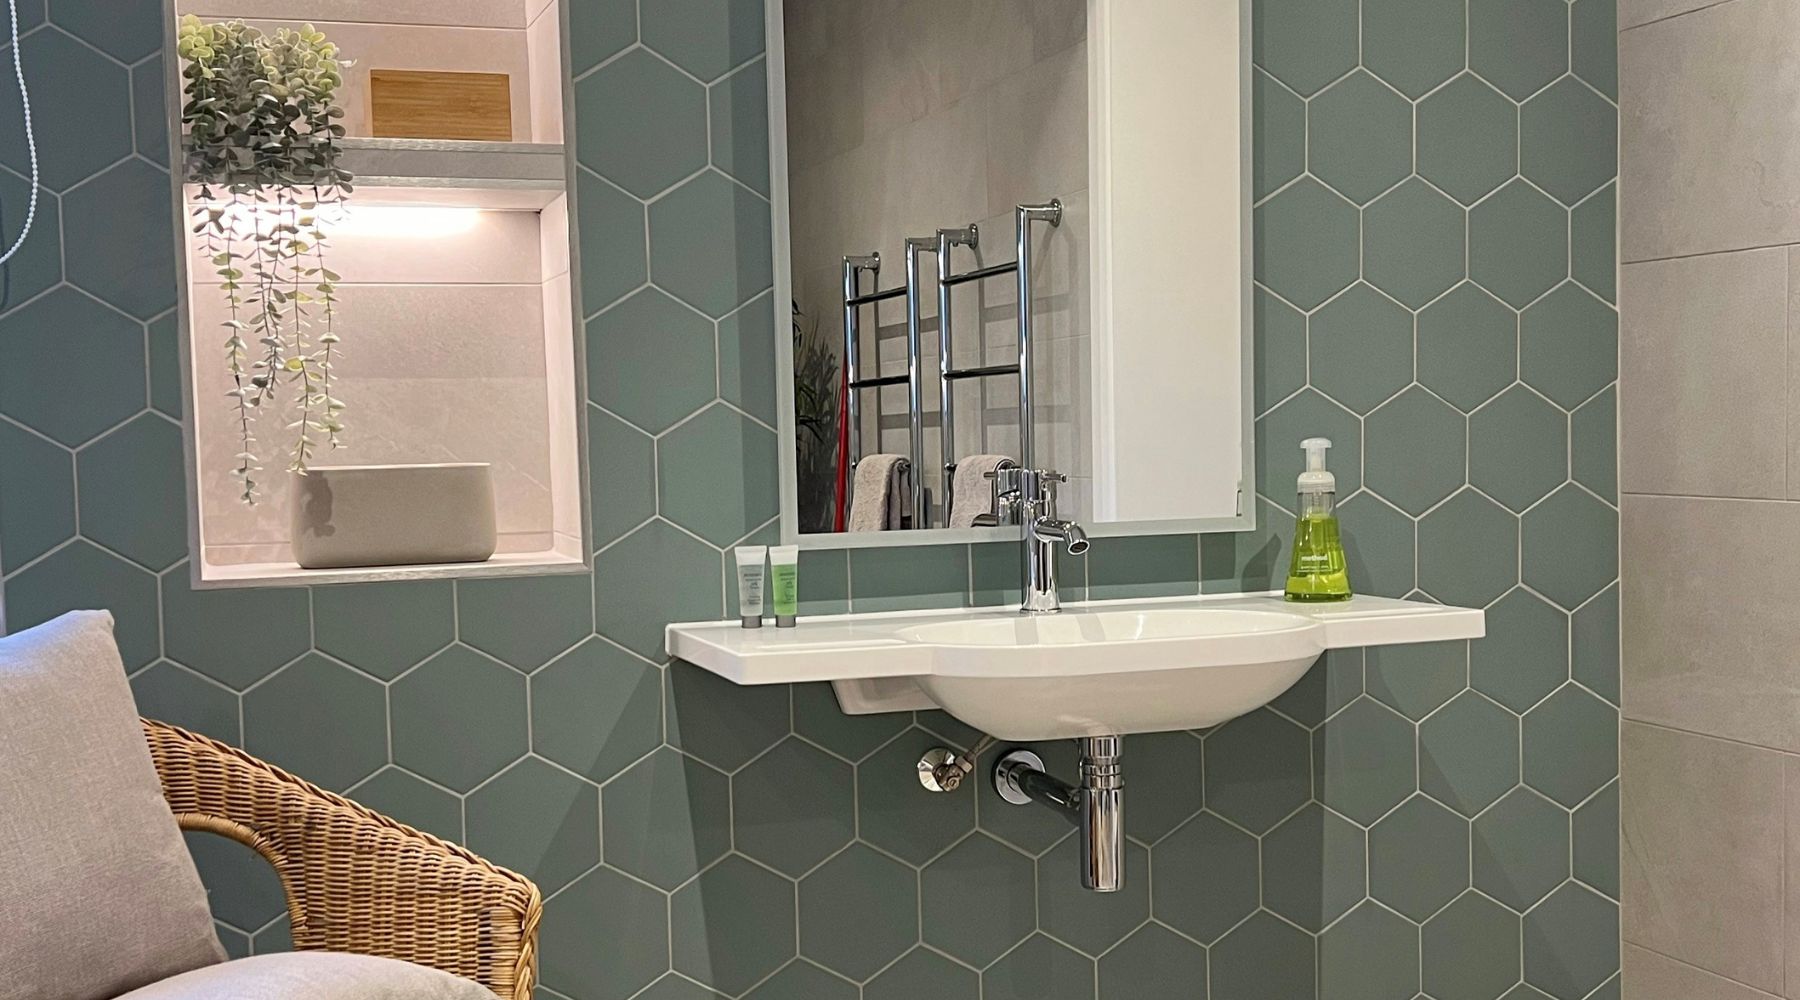 Attractive wall mounted basin and illuminated mirror with storage niche and wicker chair against hexagon tiles in Timeless Jade